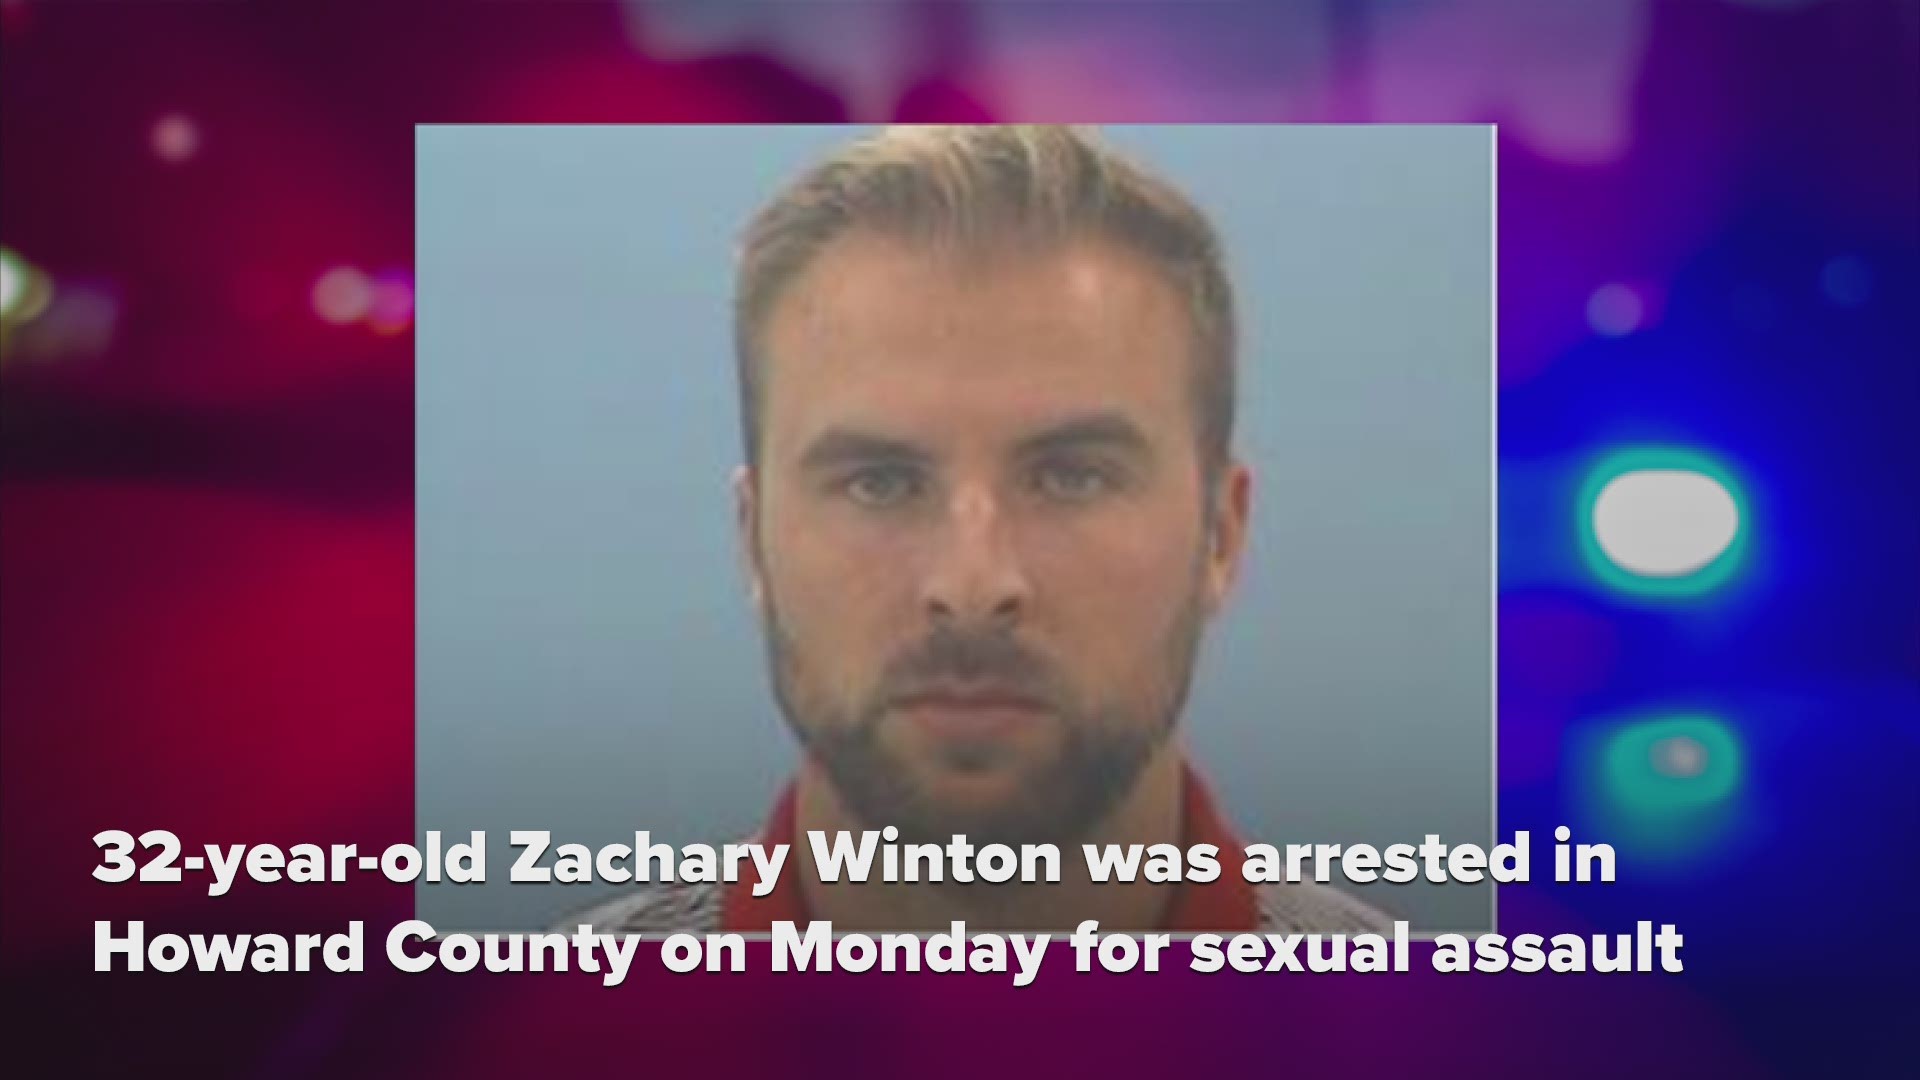 Winton has been charged with one count of first degree sexual assault and one count of second degree sexual assault.